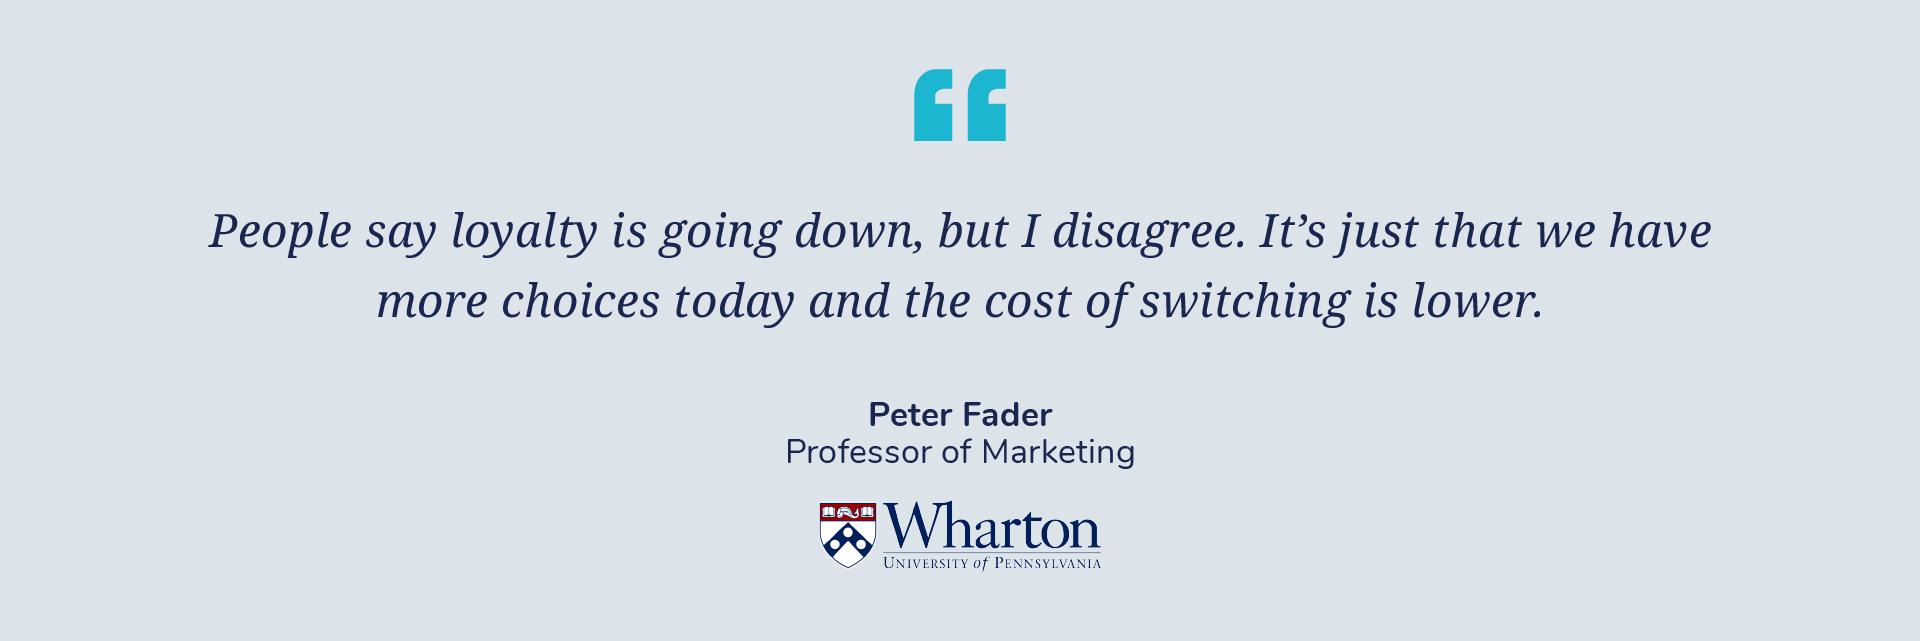 Peter Fader quote 1